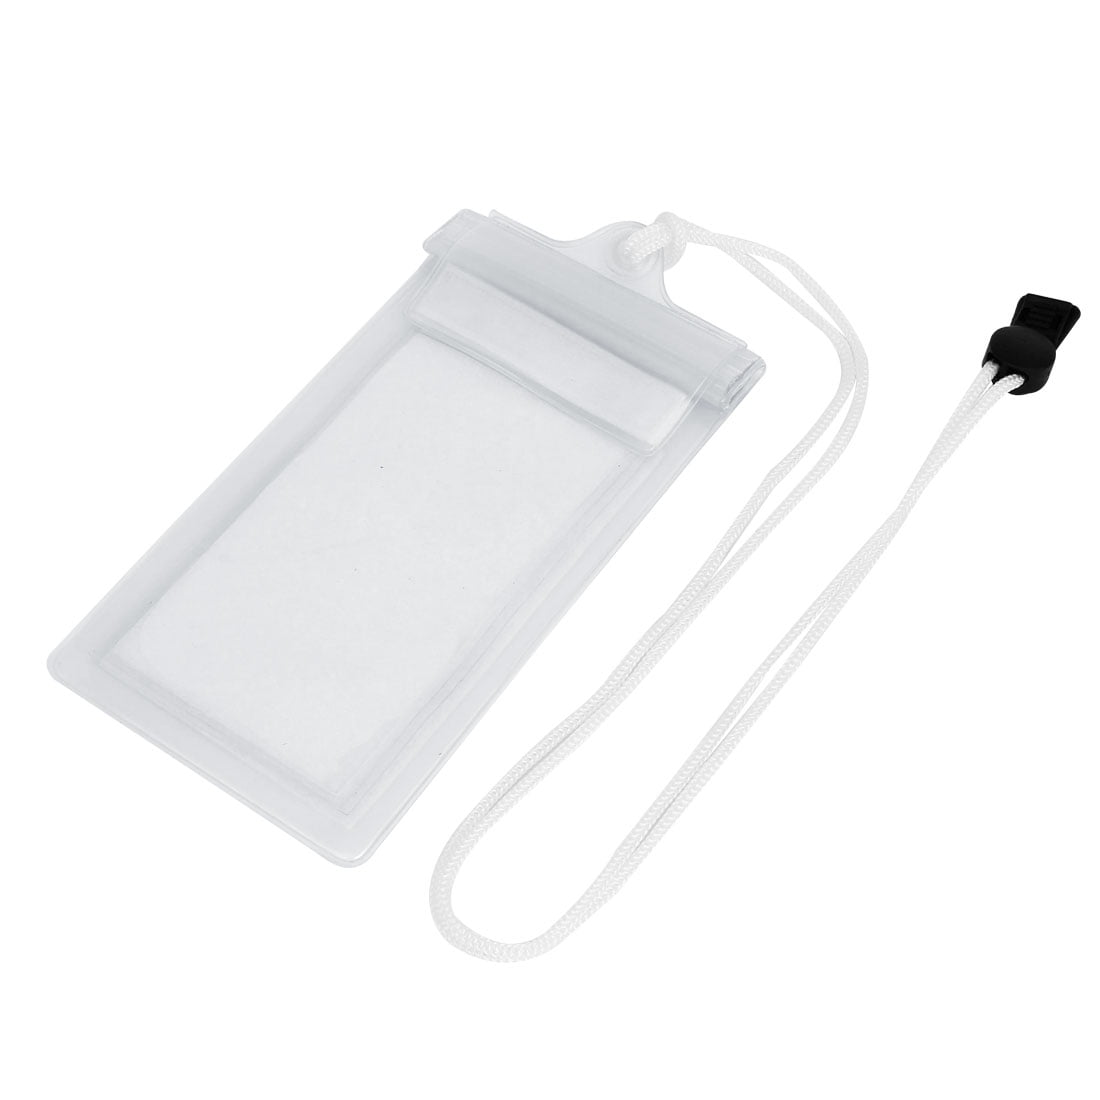 Waterproof Clear Pouch Bag Case for 4.5 Cell Phone w Neck Strap - www.semashow.com